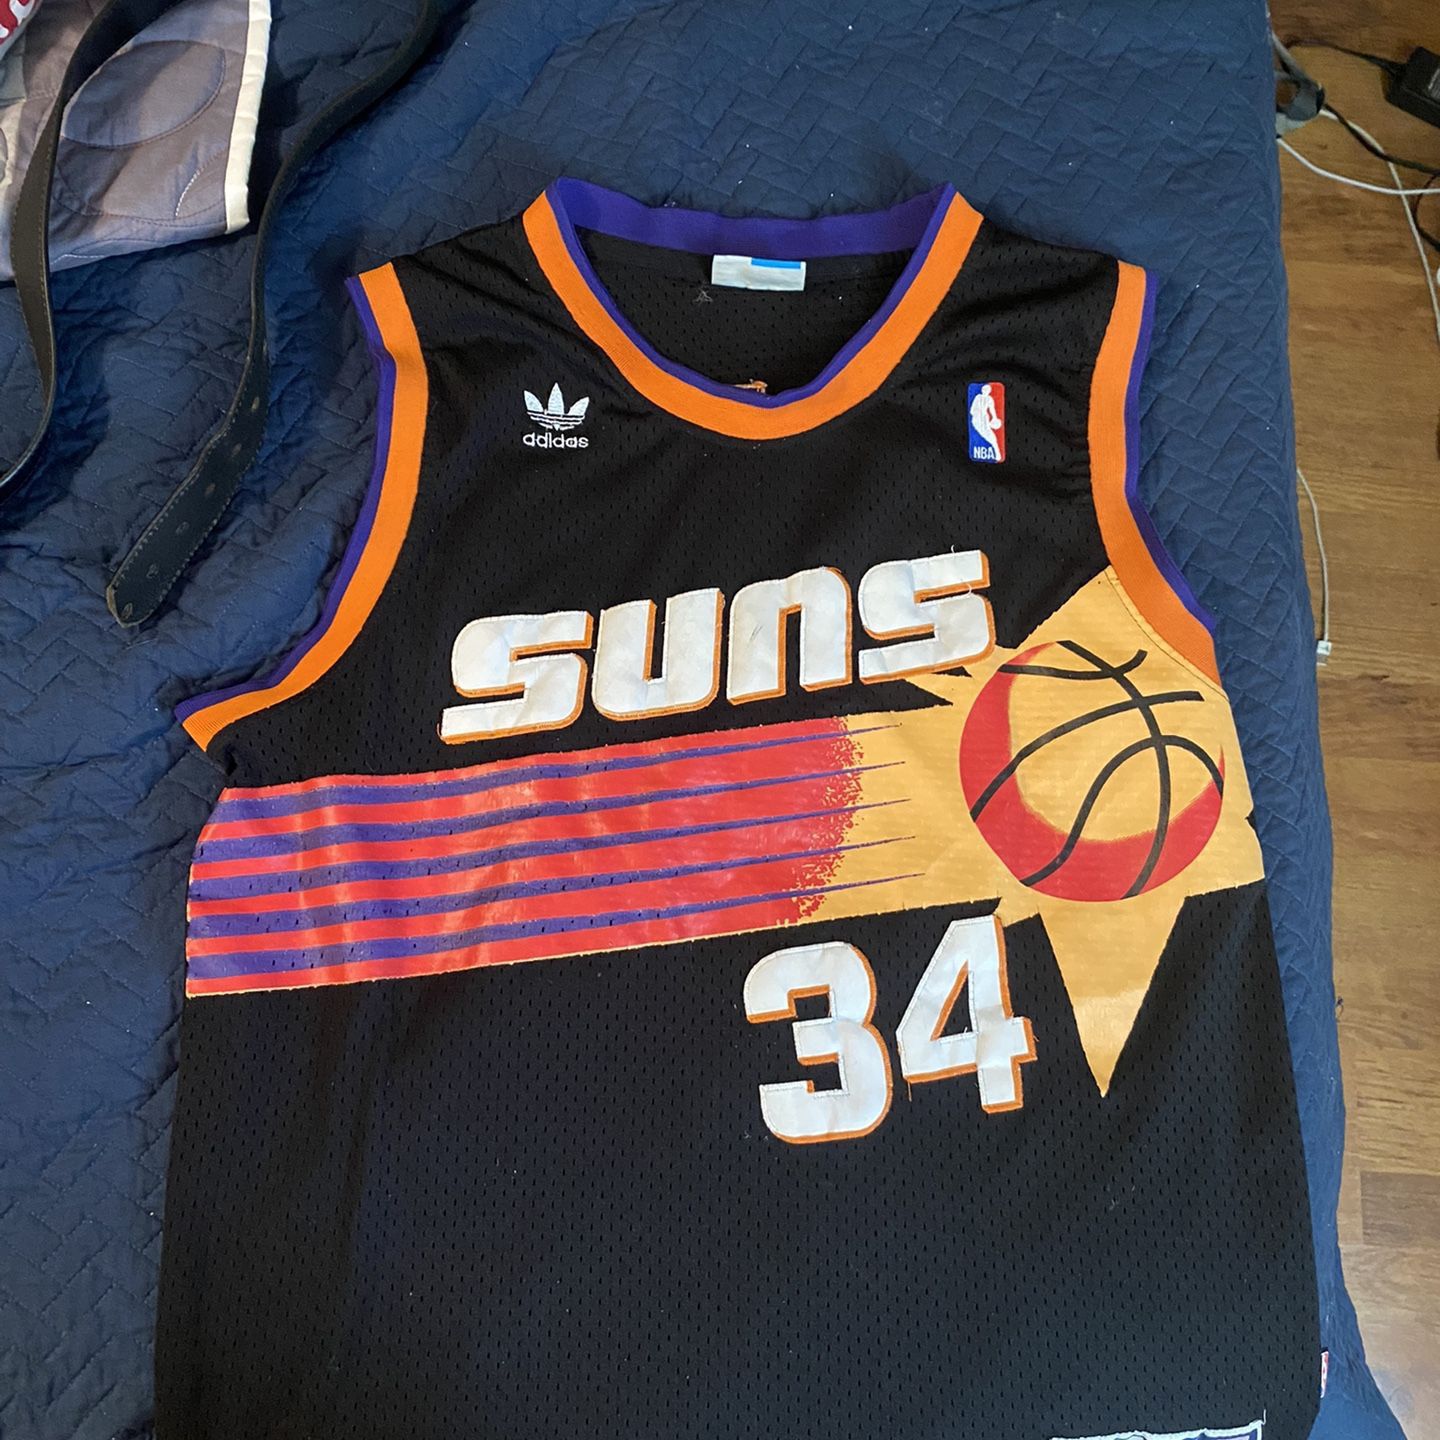 Charles Barkley Phoenix Suns jersey for Sale in Mobile, AL - OfferUp